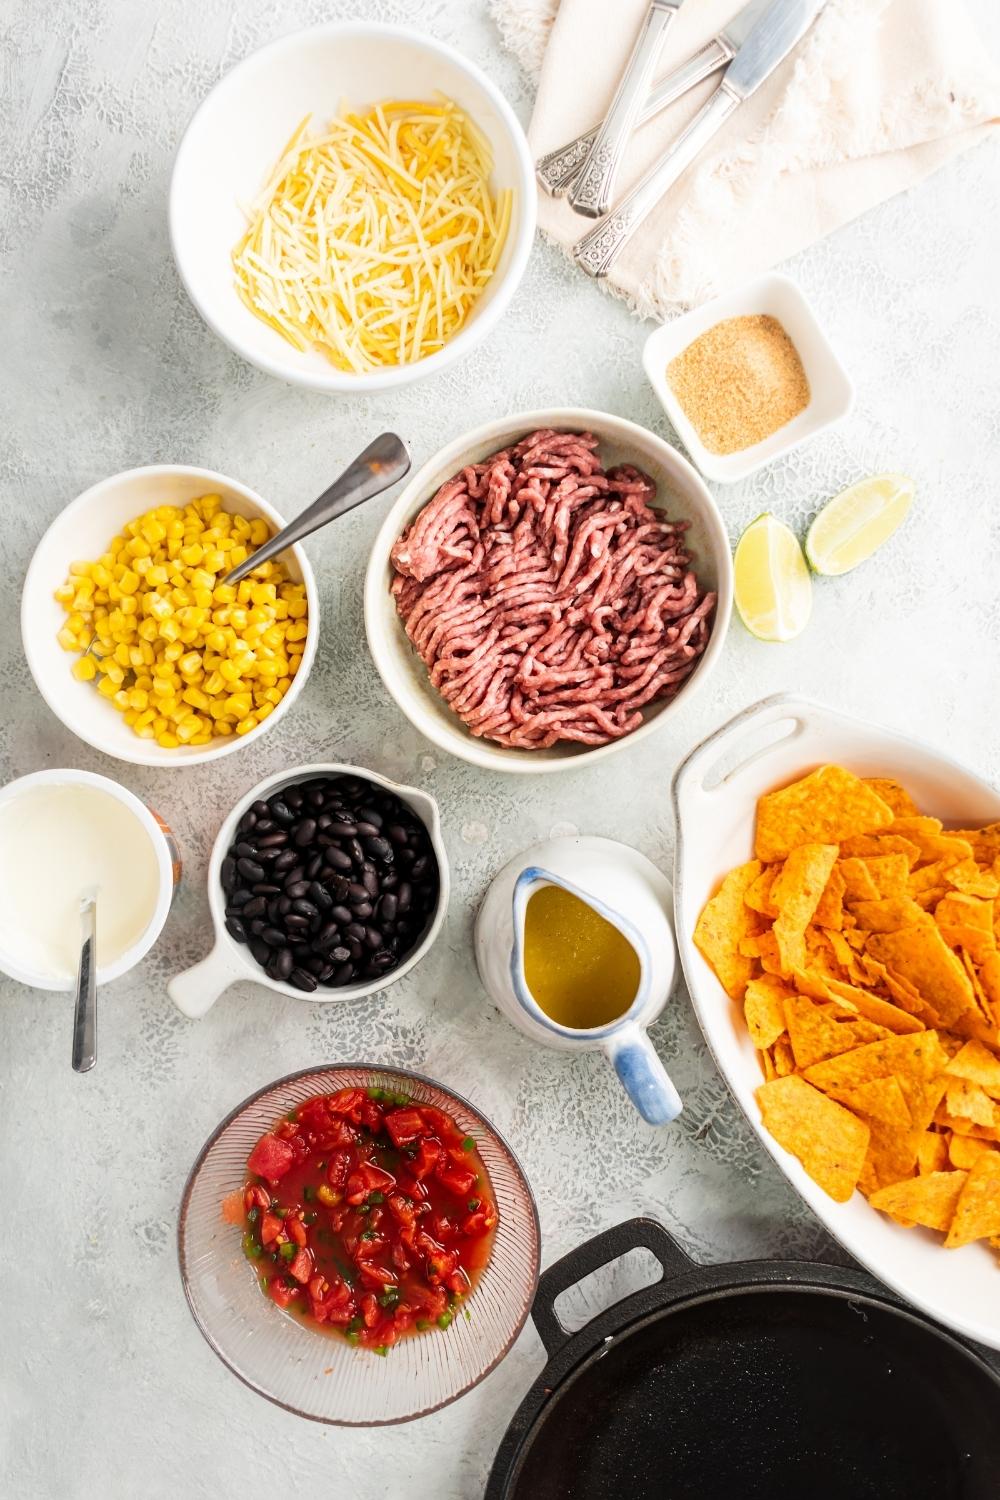 A bowl of shredded cheese, a bowl of corn, a bowl of ground beef, a bowl of black beans, a bowl of tomatoes, a bowl sour cream, and a bowl of nacho cheese flavored Doritos on a white counter.